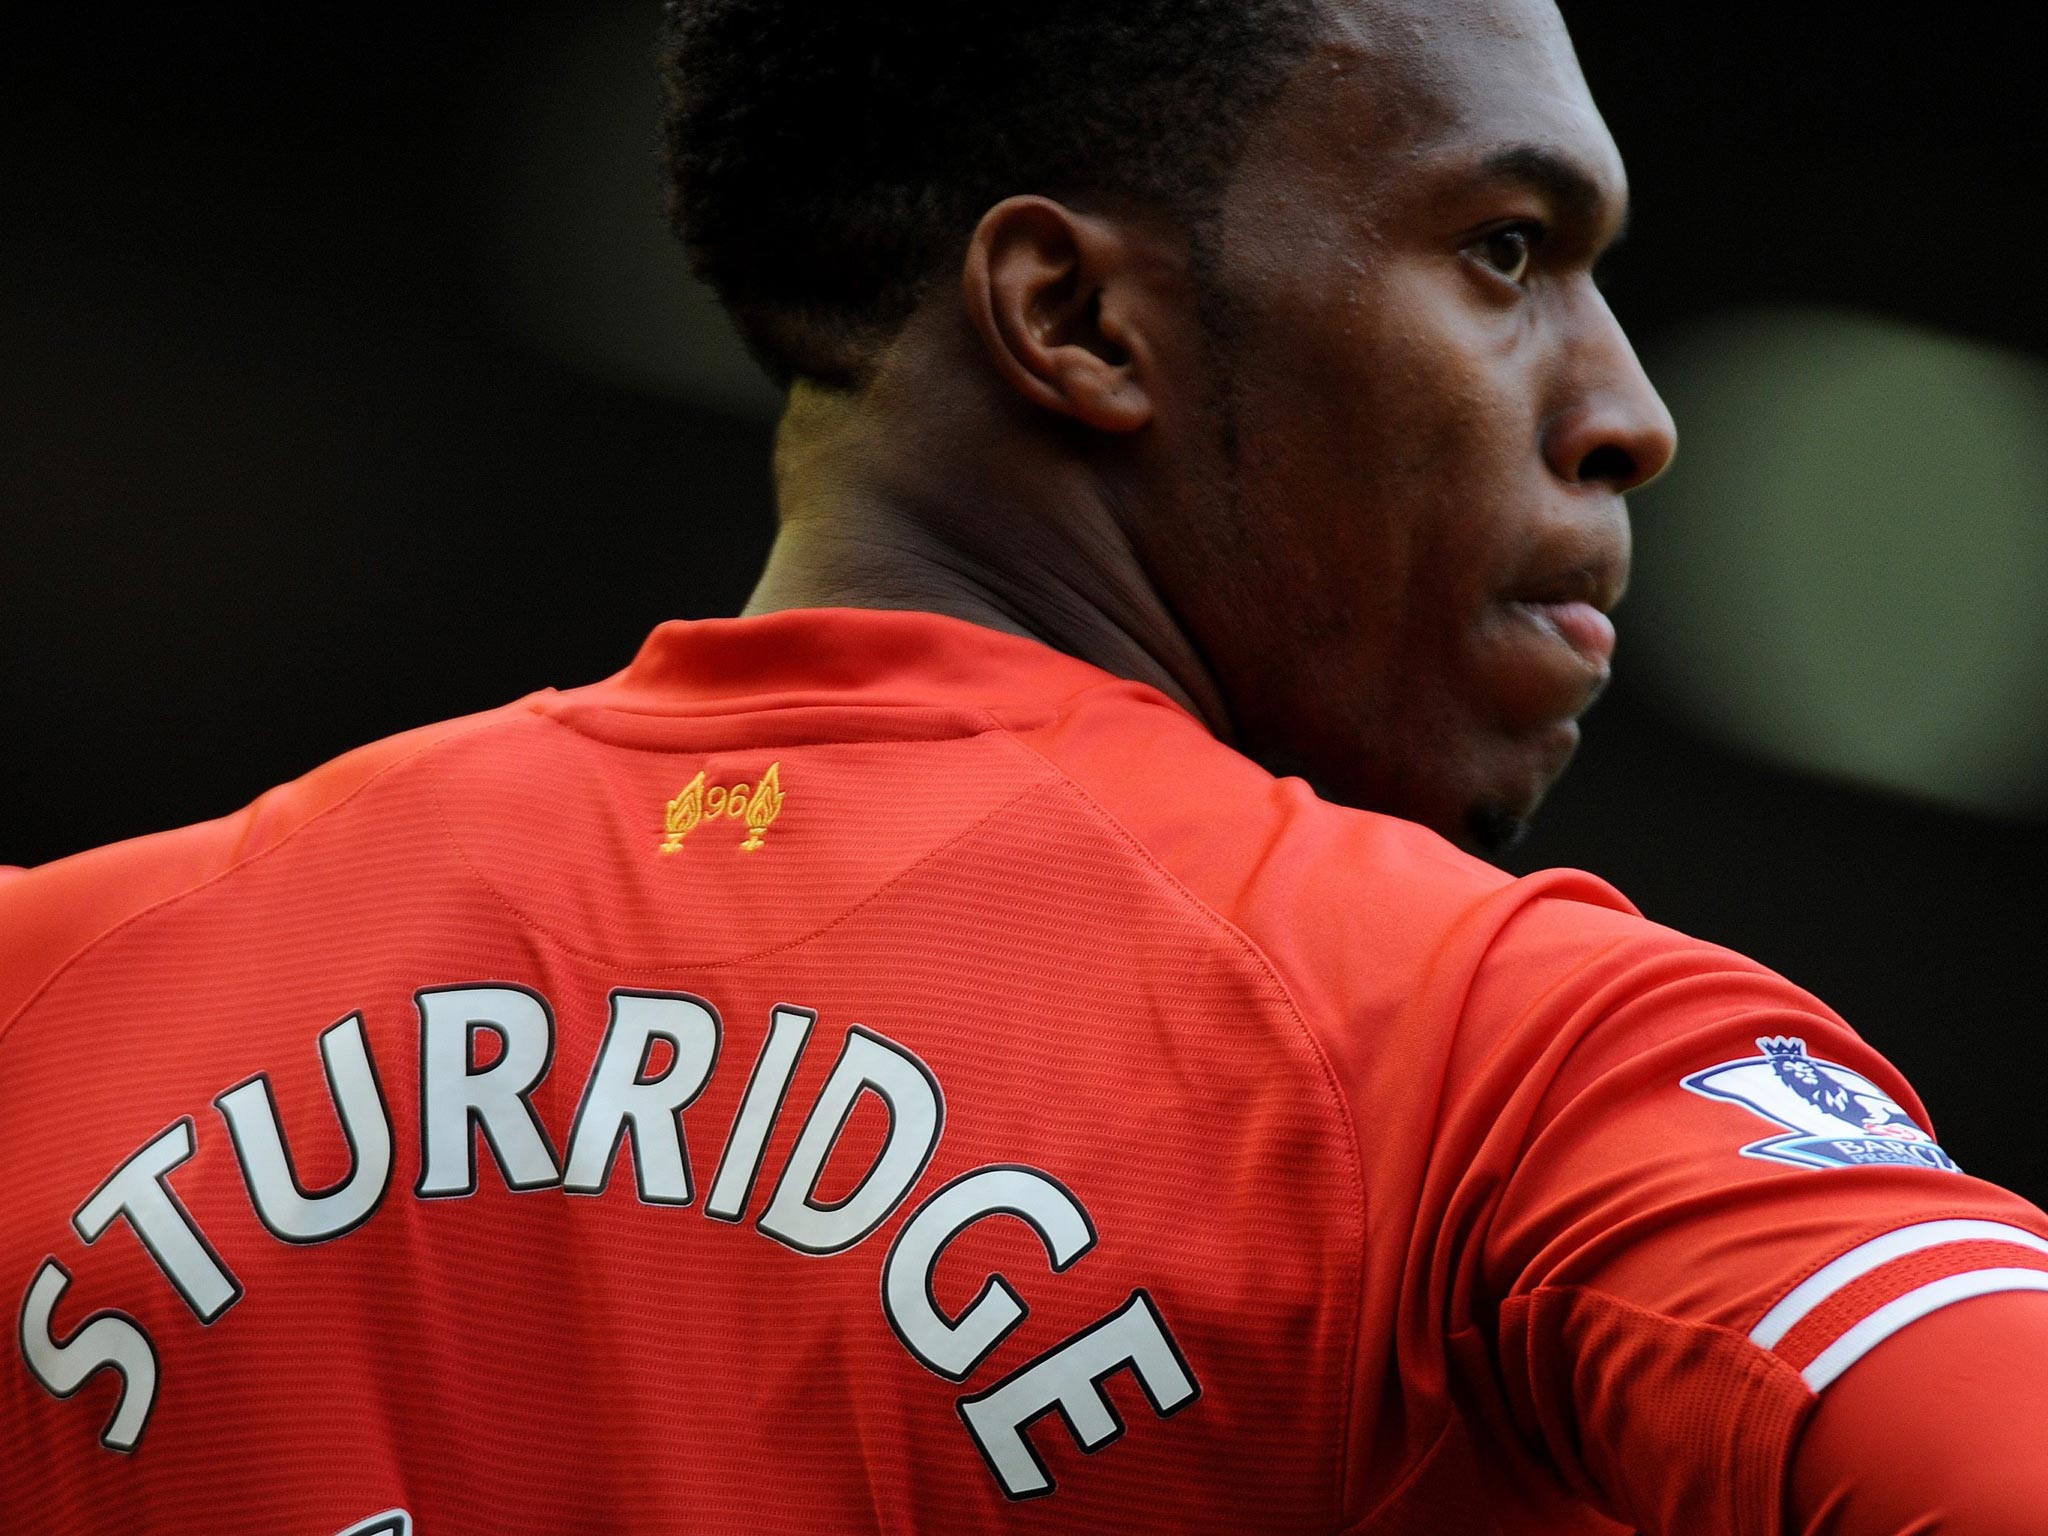 Daniel Sturridge says he is well prepared for the World Cup